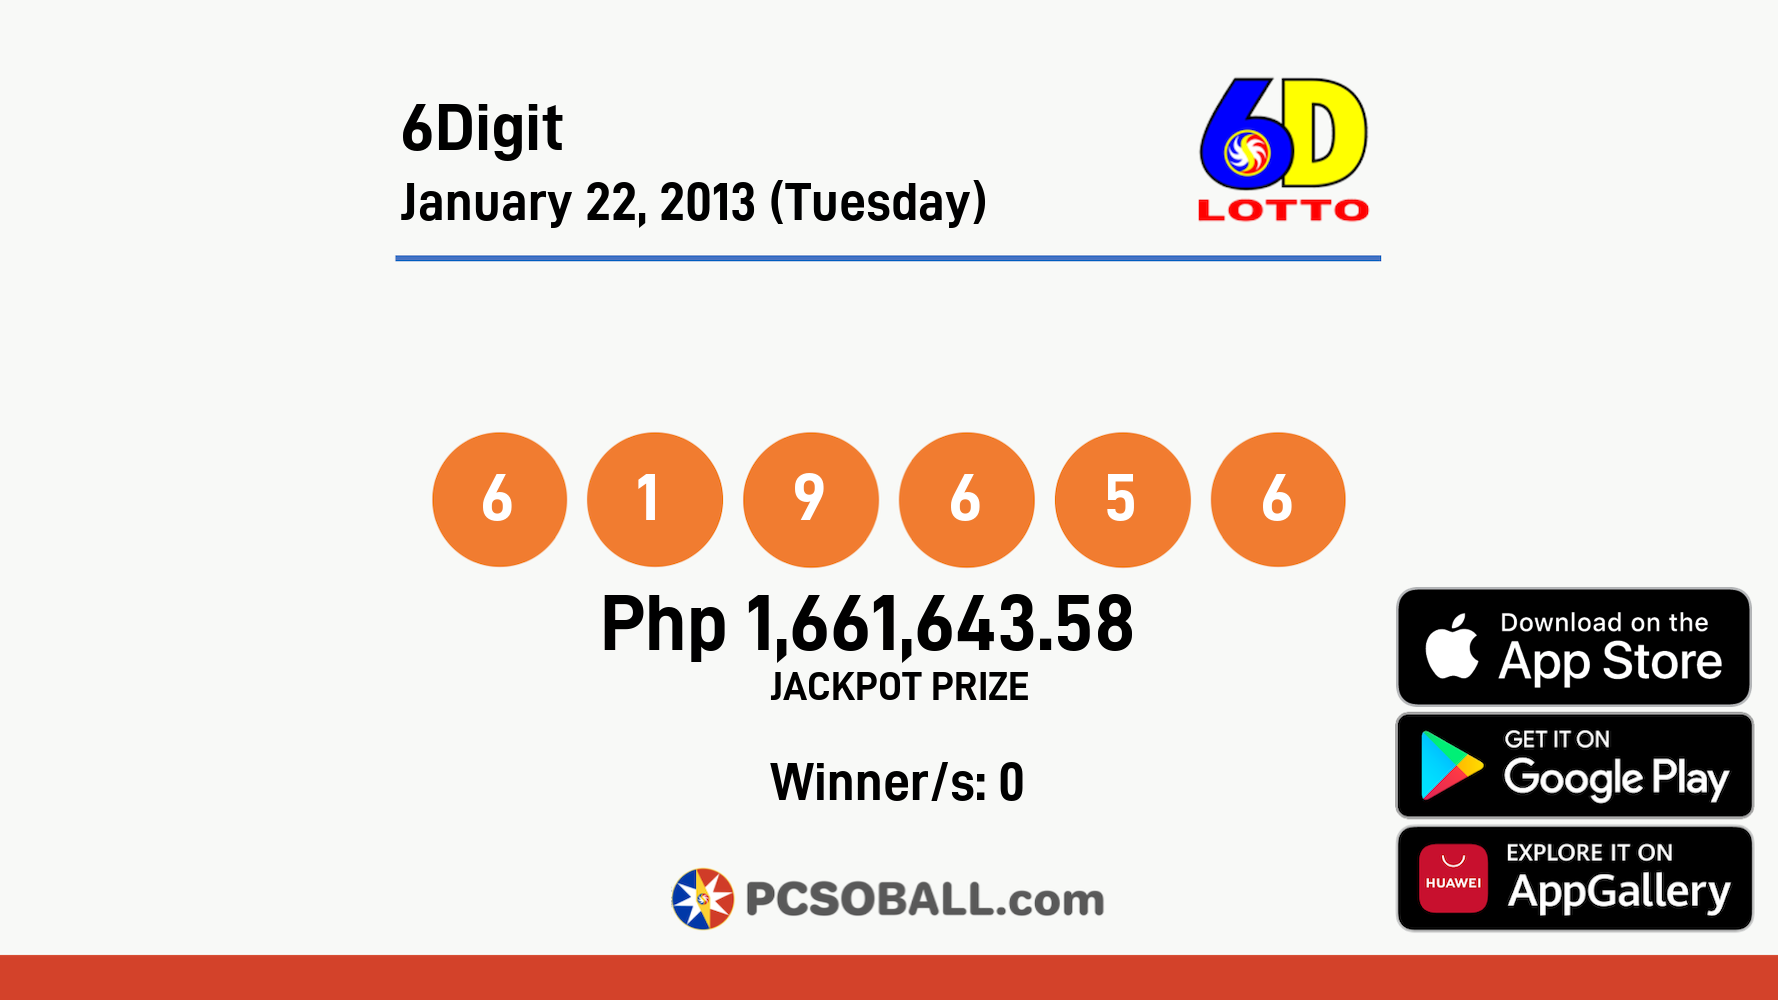 6Digit January 22, 2013 (Tuesday) Result